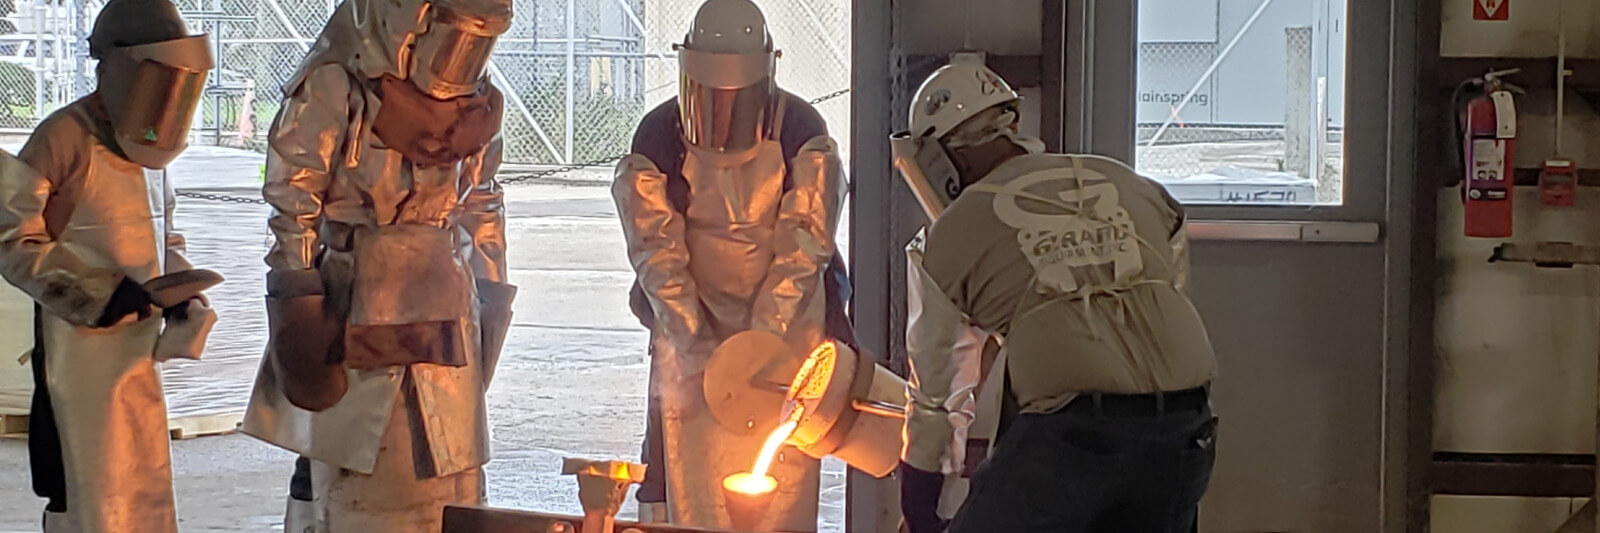 pouring melted metal